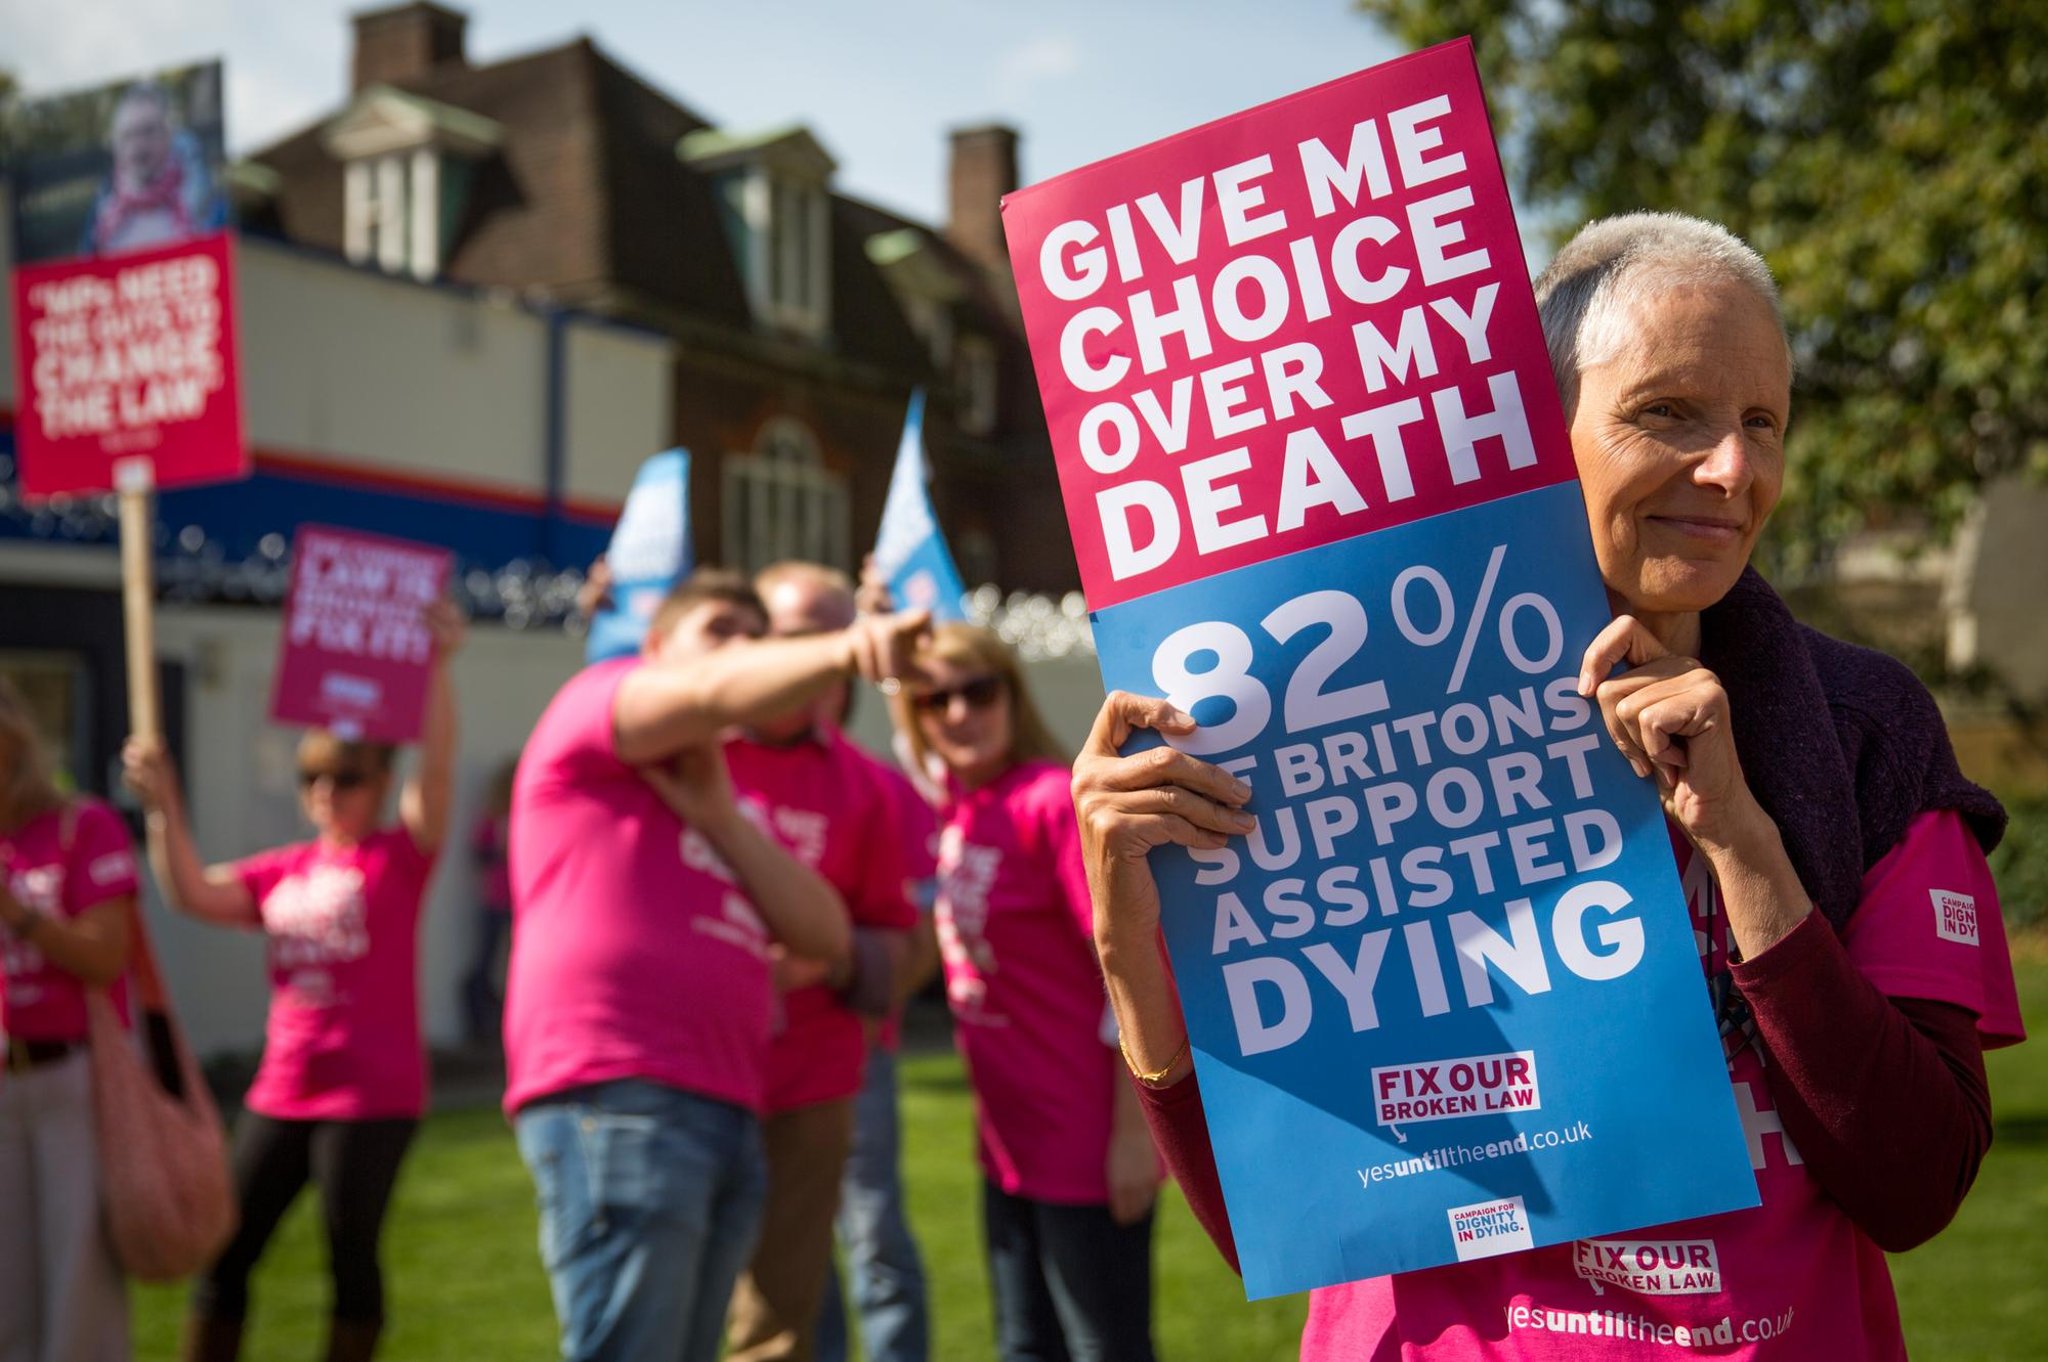 Coalition of nearly 200 medical professionals fight again assisted dying  move | The Scotsman